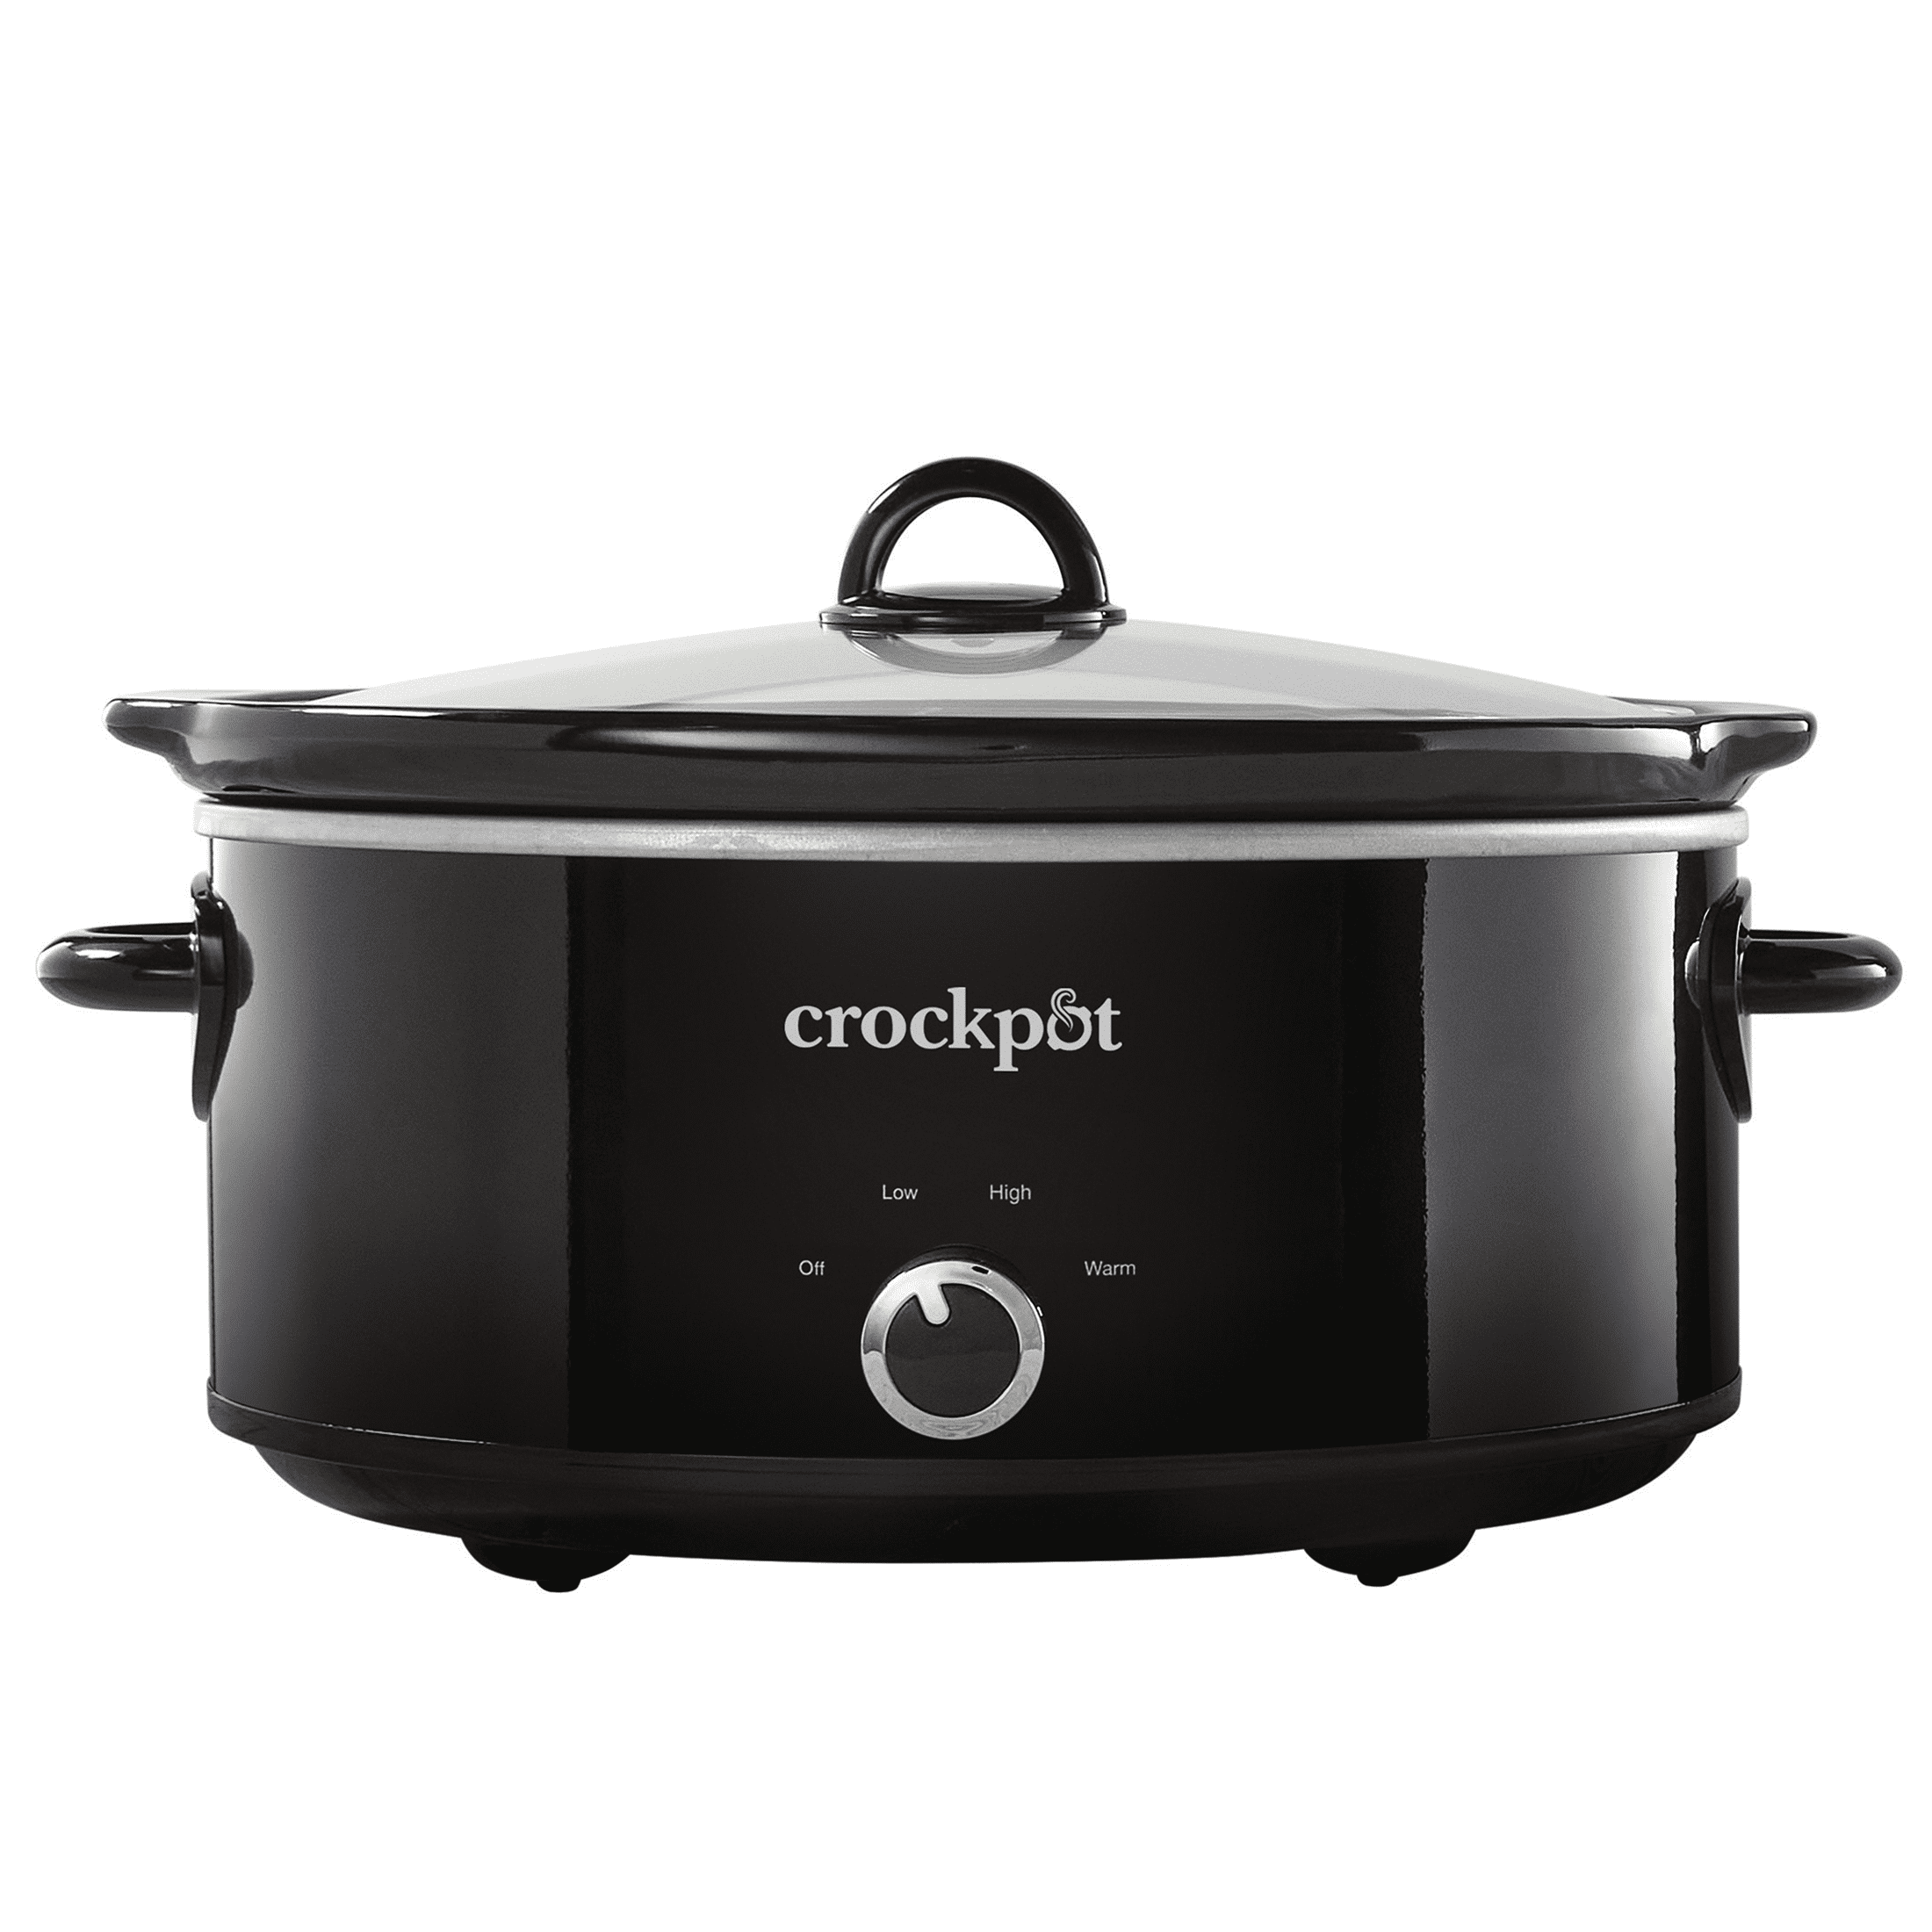 common-crock-pot-issues-solved